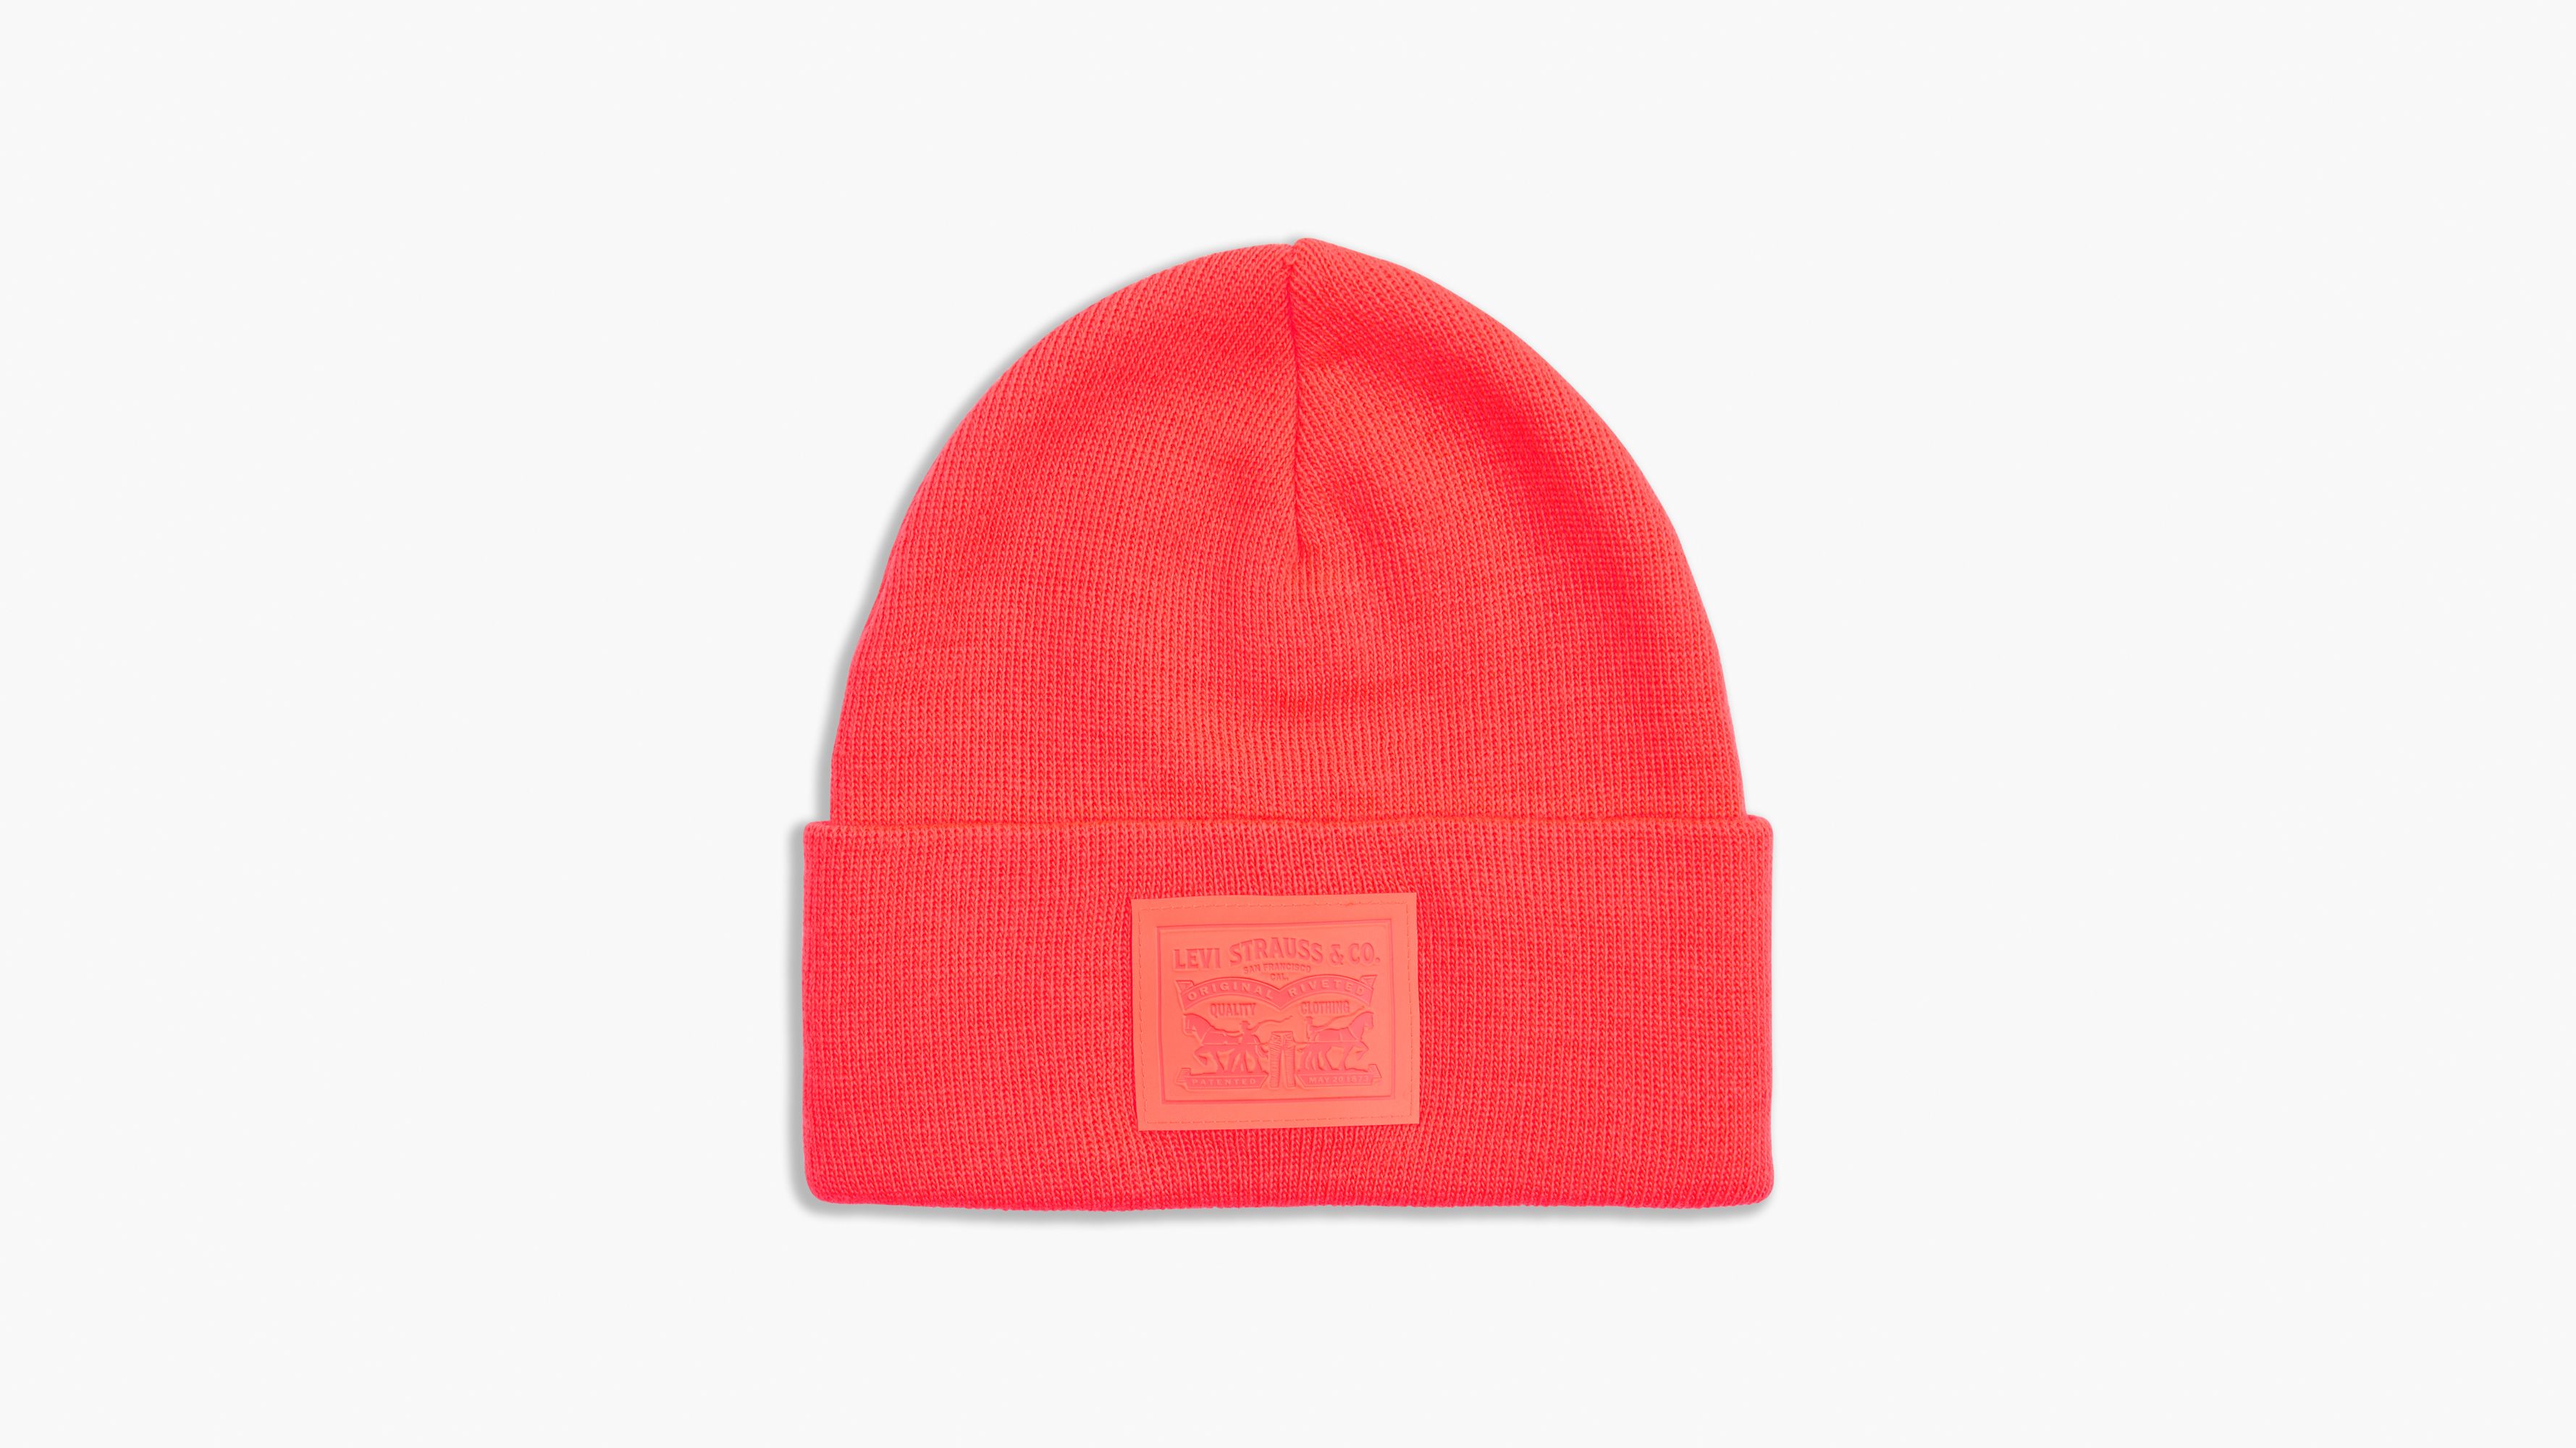 FHTH LV Patch Beanie – From Head To Hose